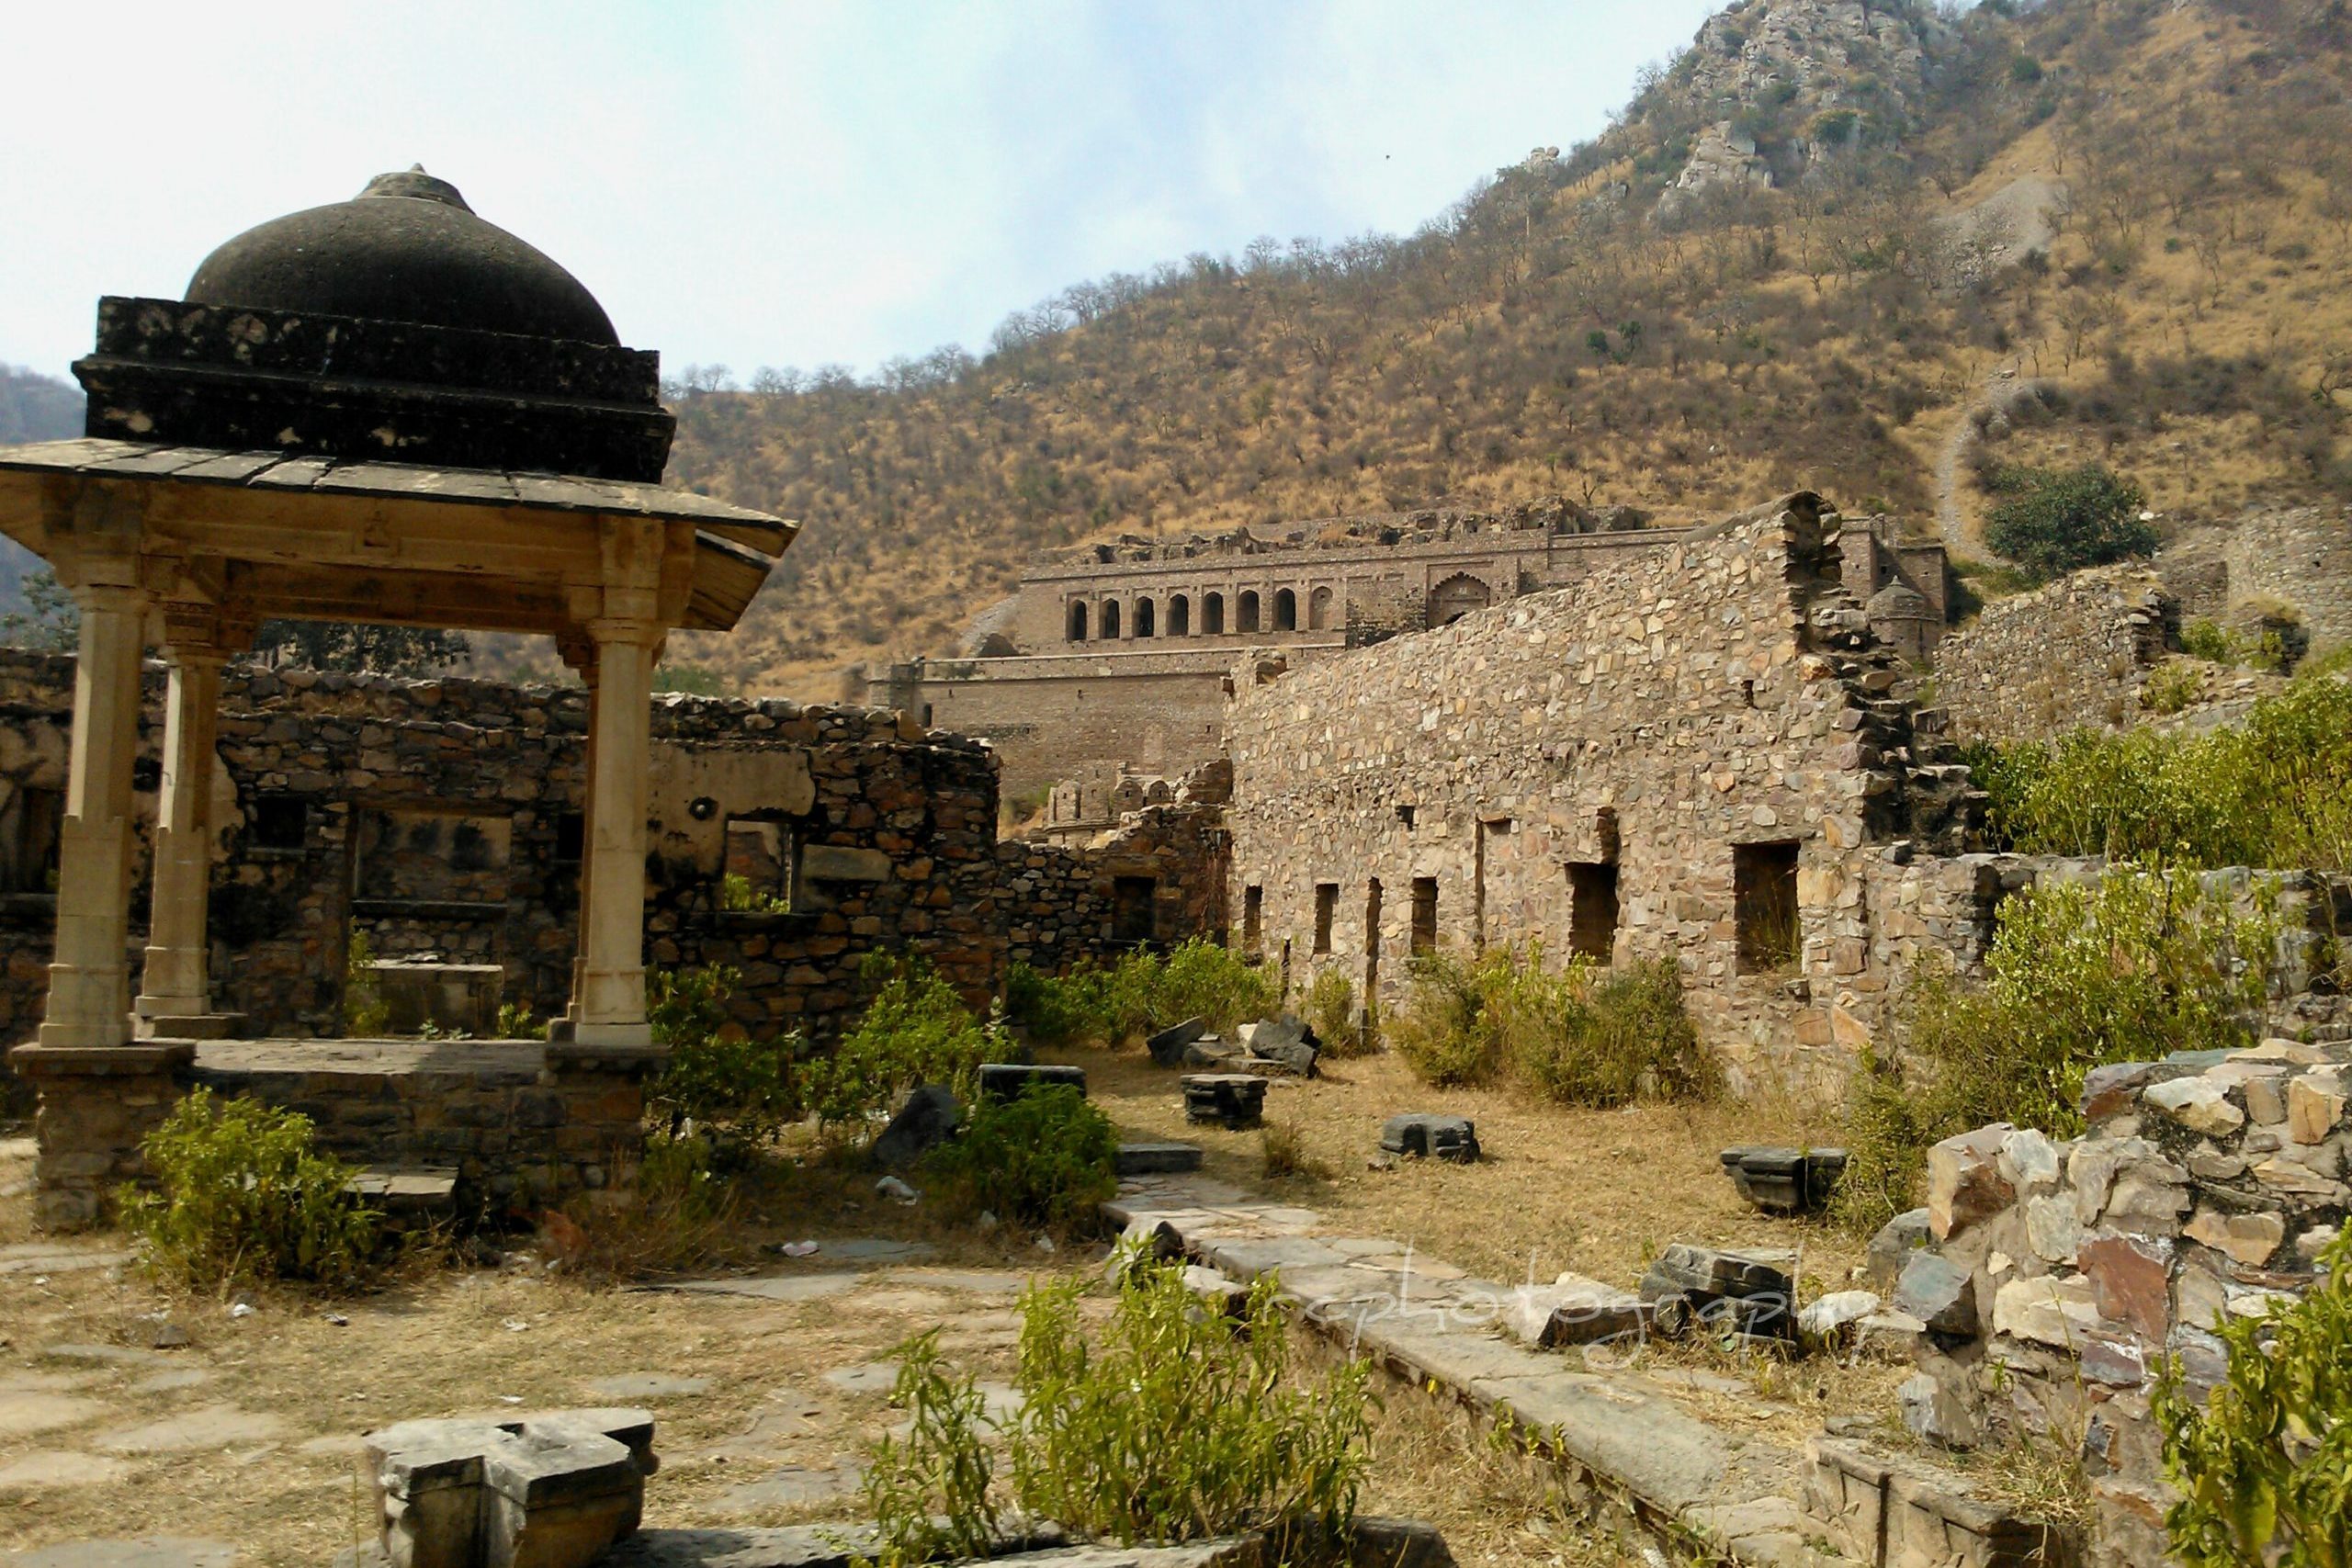 Bhangarh Fort and surrounding mountains in Rajasthan, India